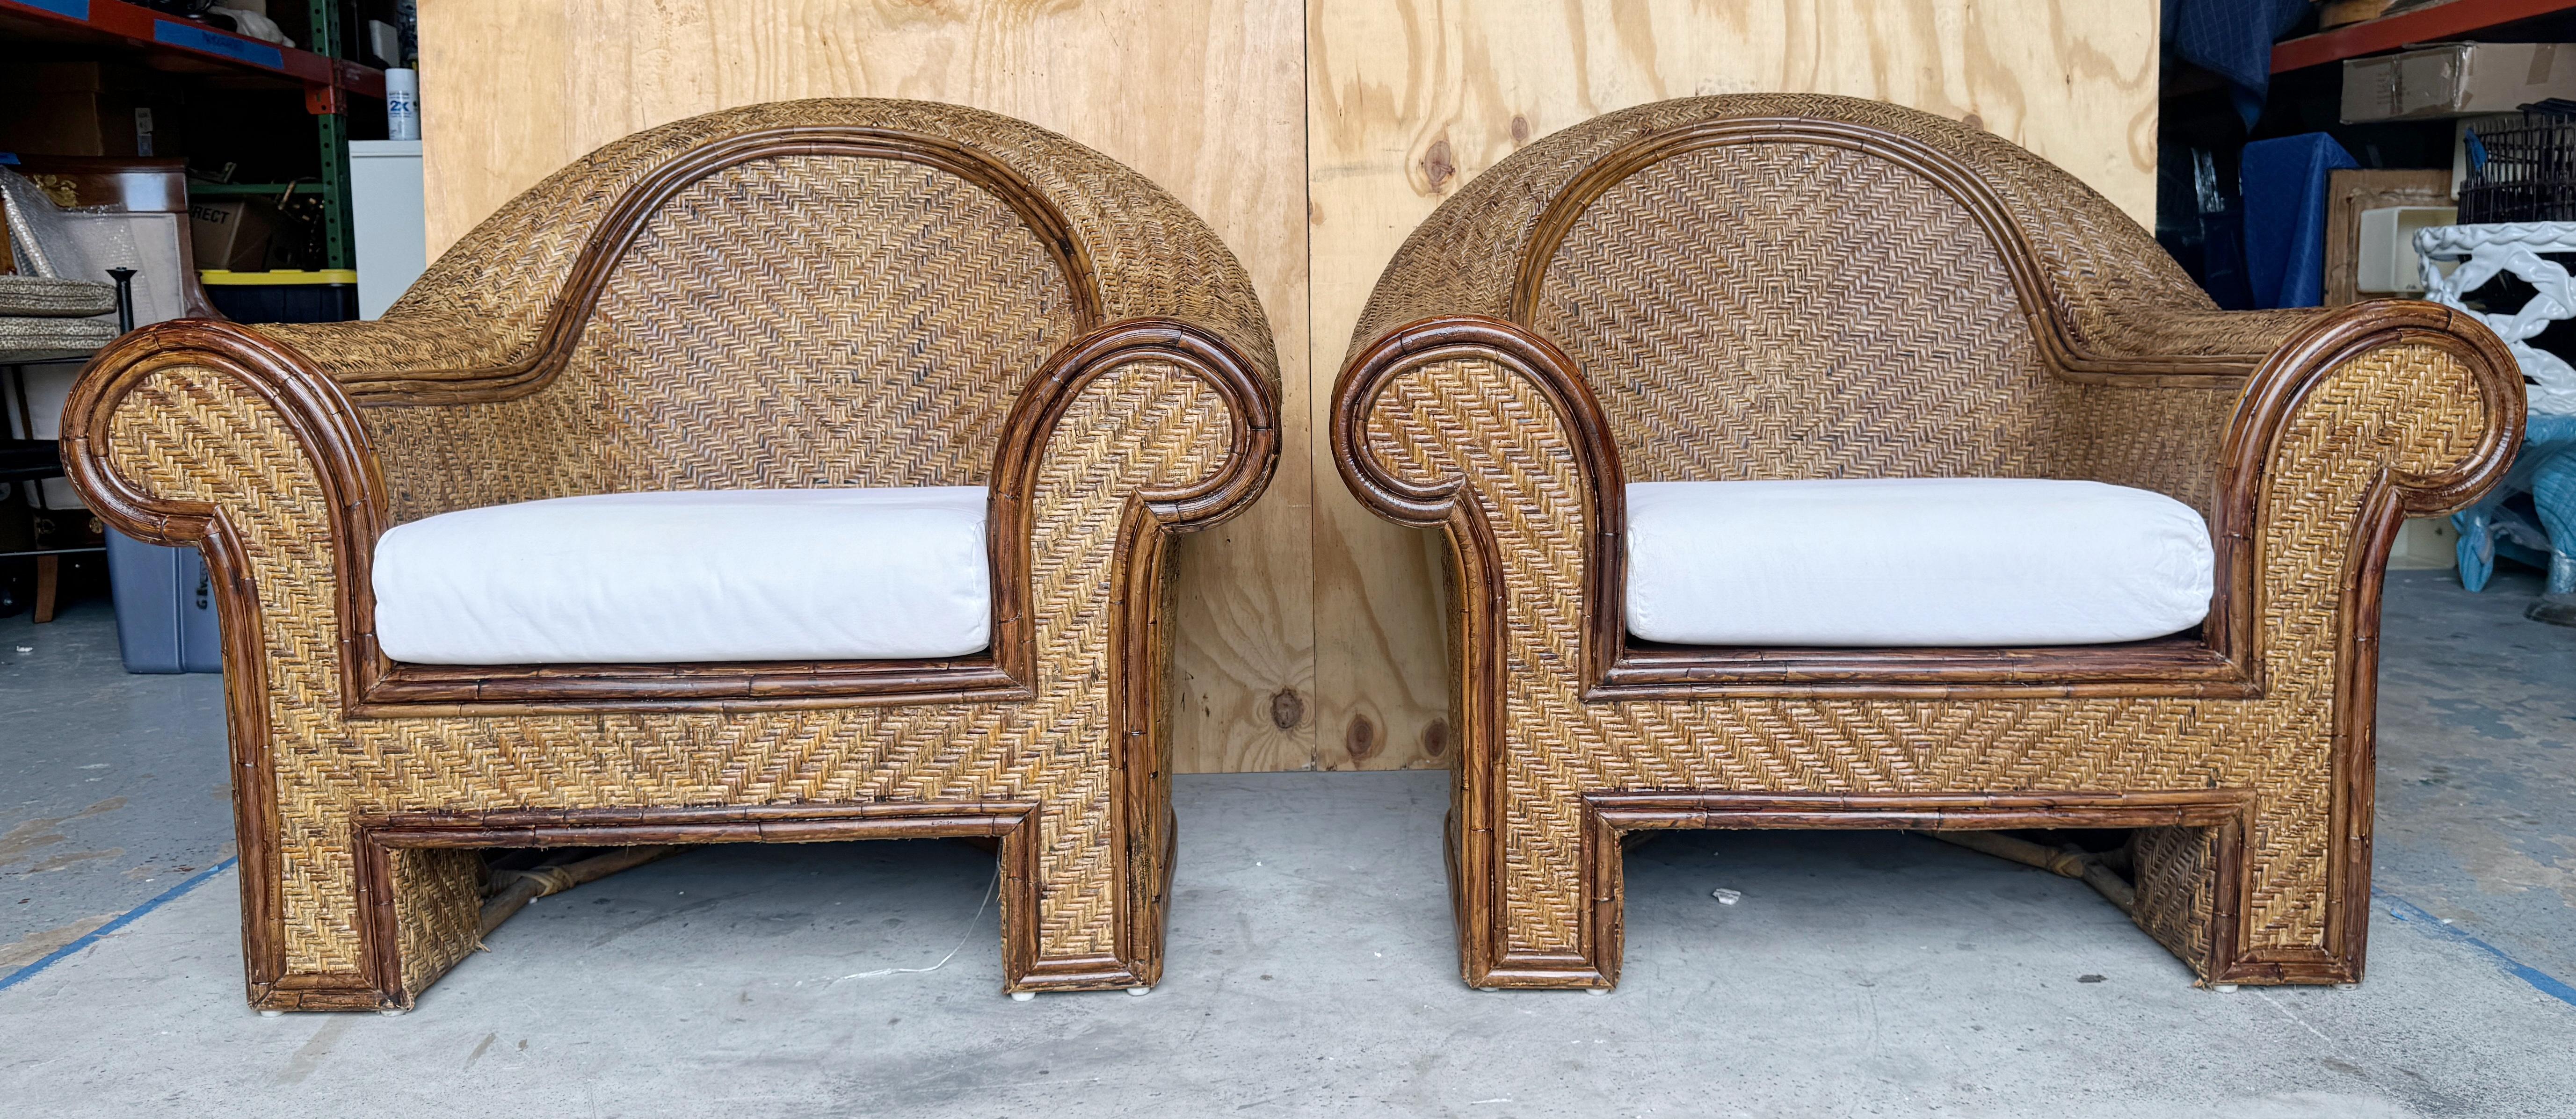 Upholstery Pair of Coastal Rattan & Reed Woven Club Chairs, attributed to Ralph Lauren  For Sale